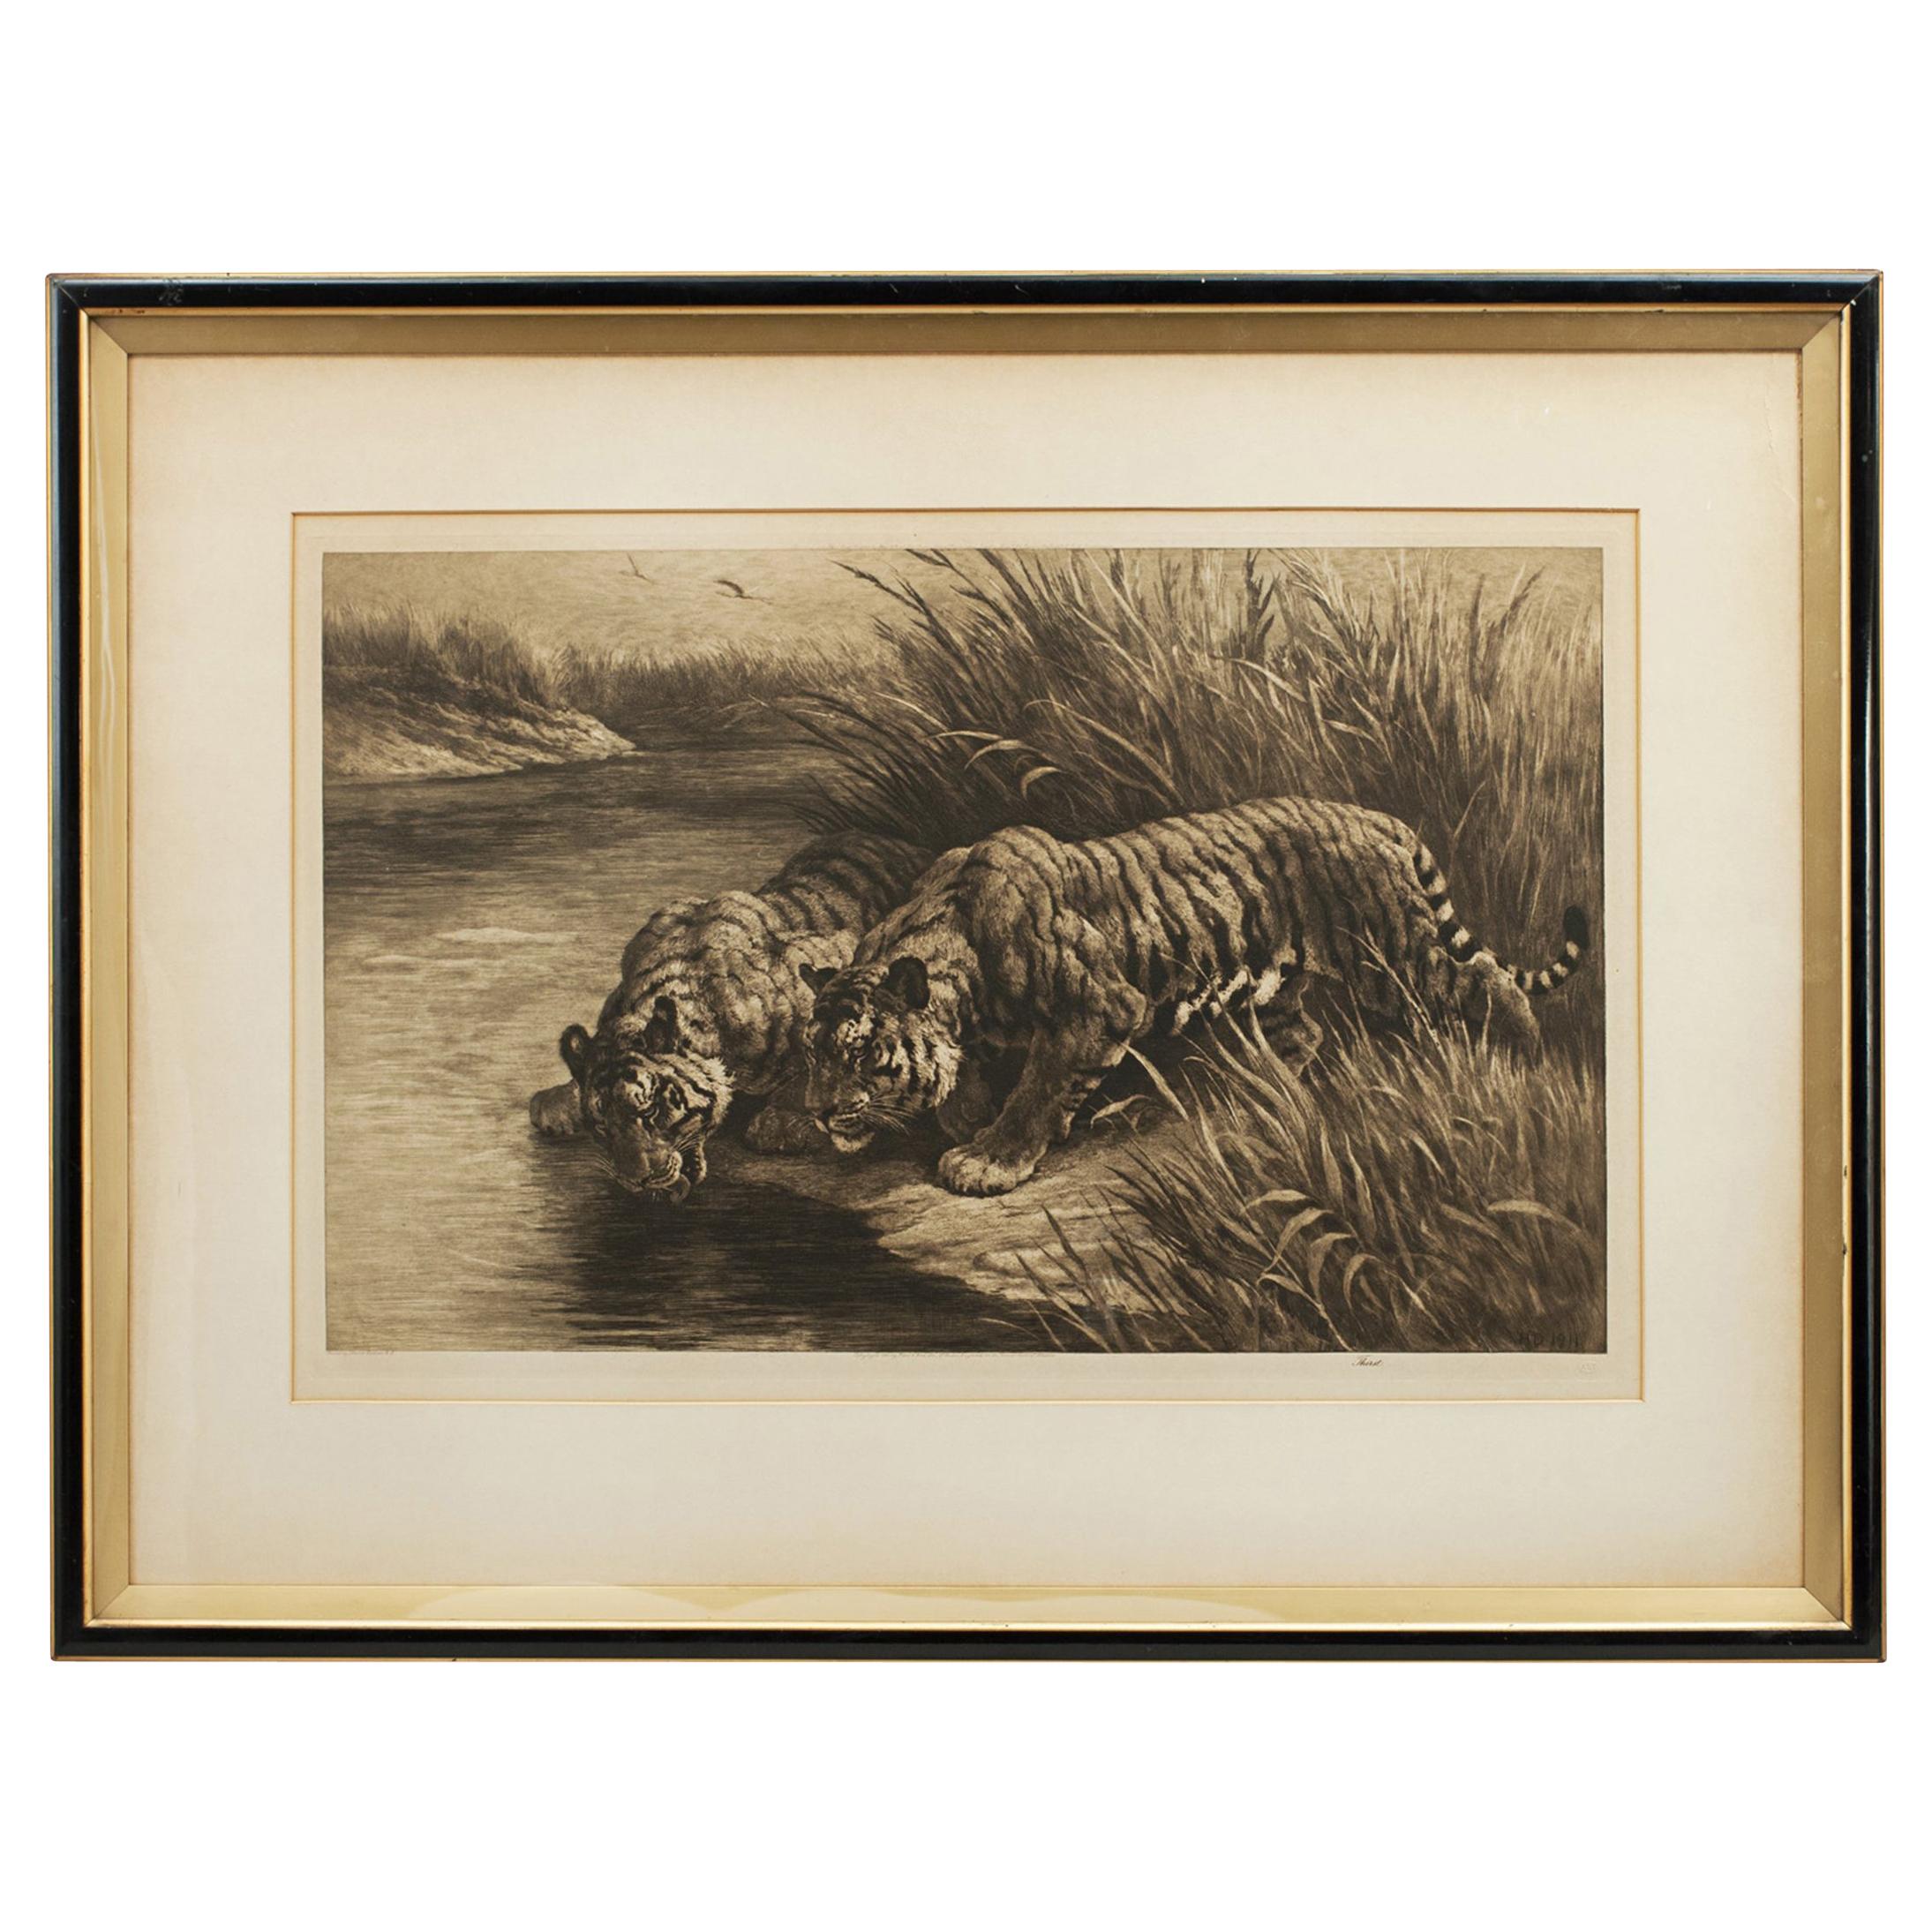 Wildlife Etching by Herbert Dicksee, 'Thirst' Tigers Drinking from the Stream